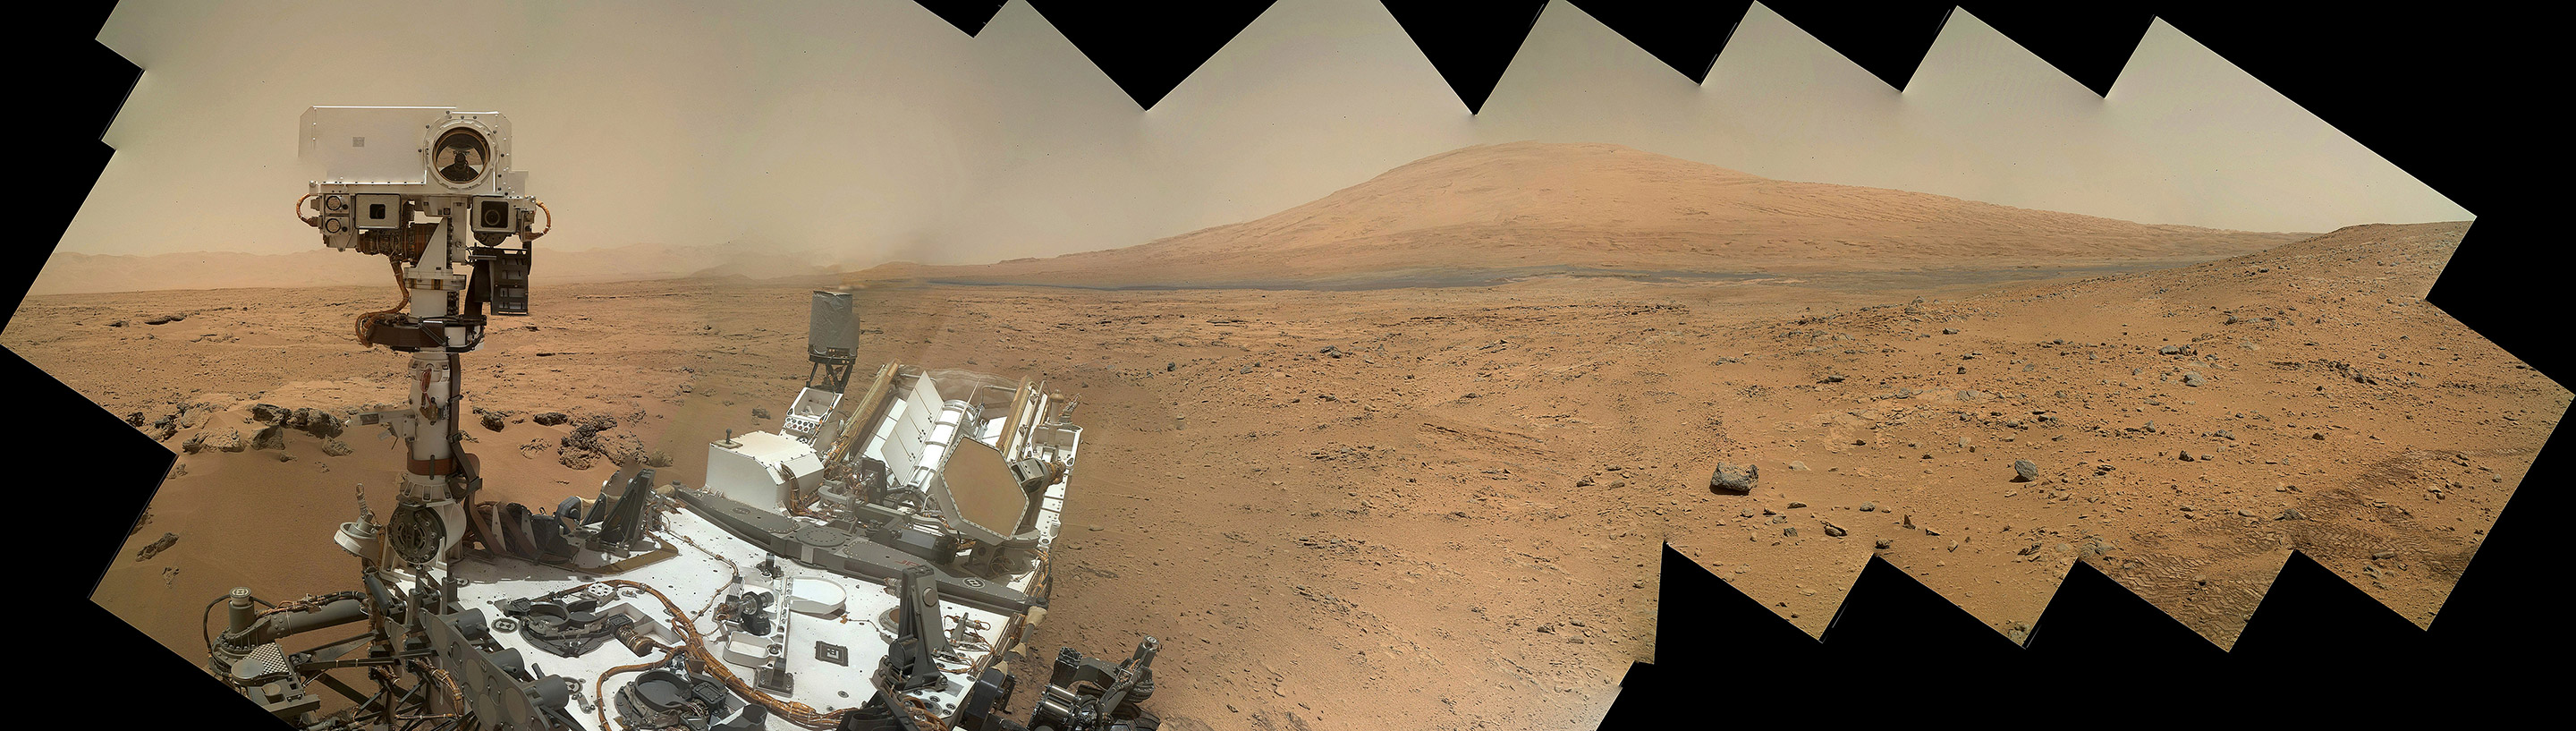 Curiosity snaps a self portrait with Mount Sharp in the background at Rocknest ripple in Gale Crater on Sol 85 using the Mars Hand Lens Imager (MAHLI) camera on the robotic arm. This color mosaic was assembled from raw images taken Nov. 1, 2012.Credit: NASA/JPL-Caltech/MSSS/Ken Kremer/Marco Di Lorenzo